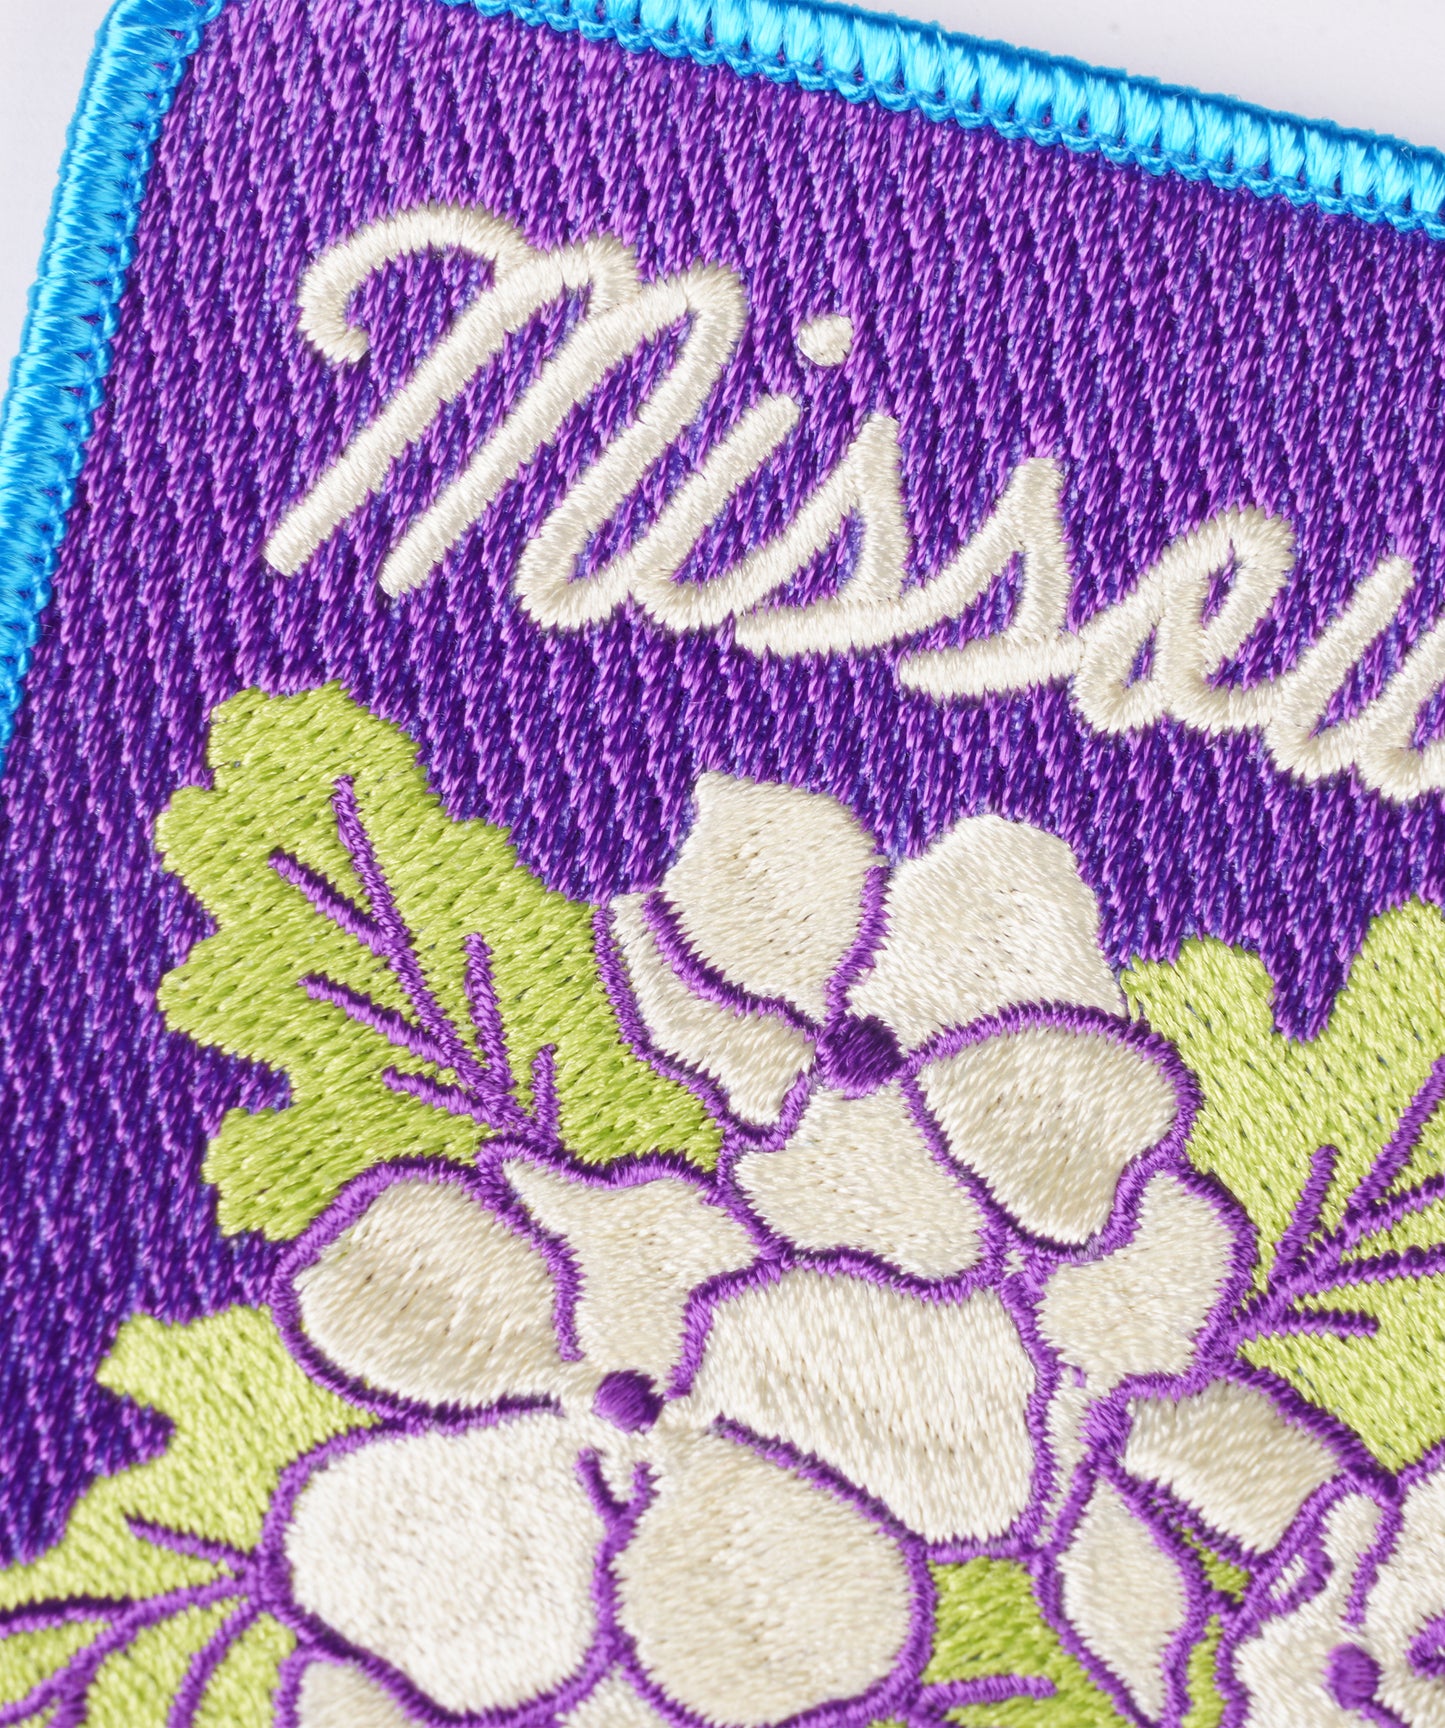 Missouri Embroidered Patch